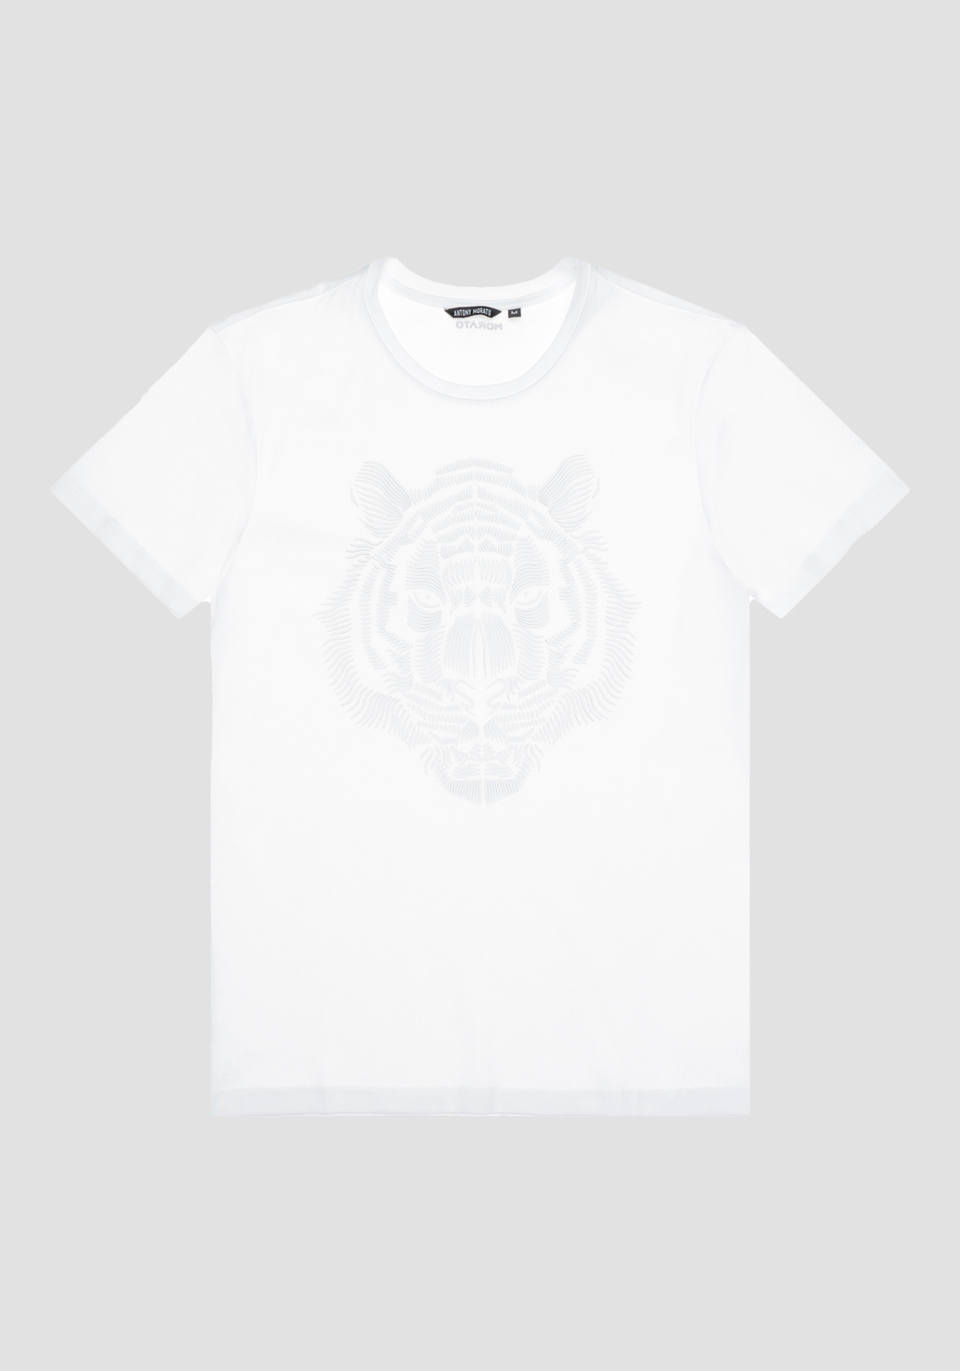 SLIM FIT T-SHIRT IN PURE COTTON WITH TIGER PRINT - Antony Morato Online Shop